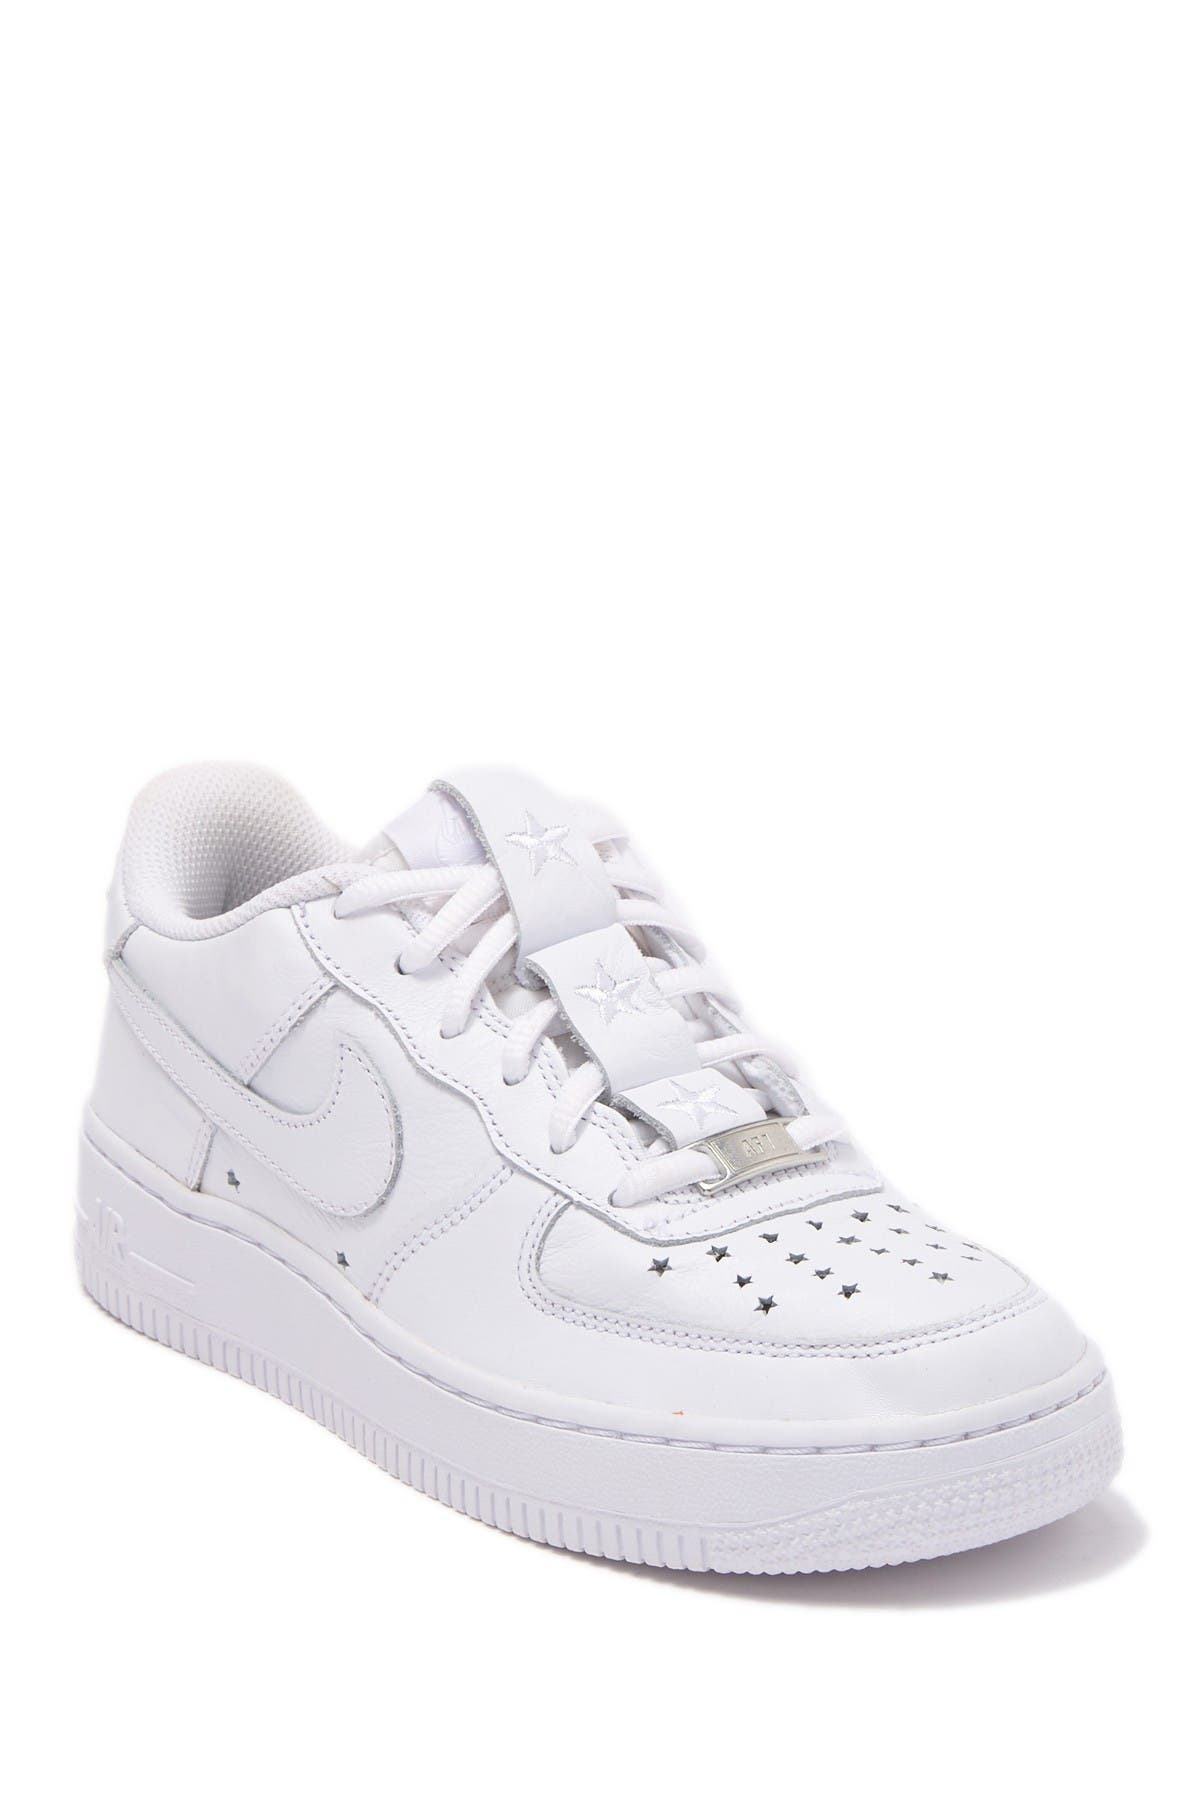 nordstrom air force 1s